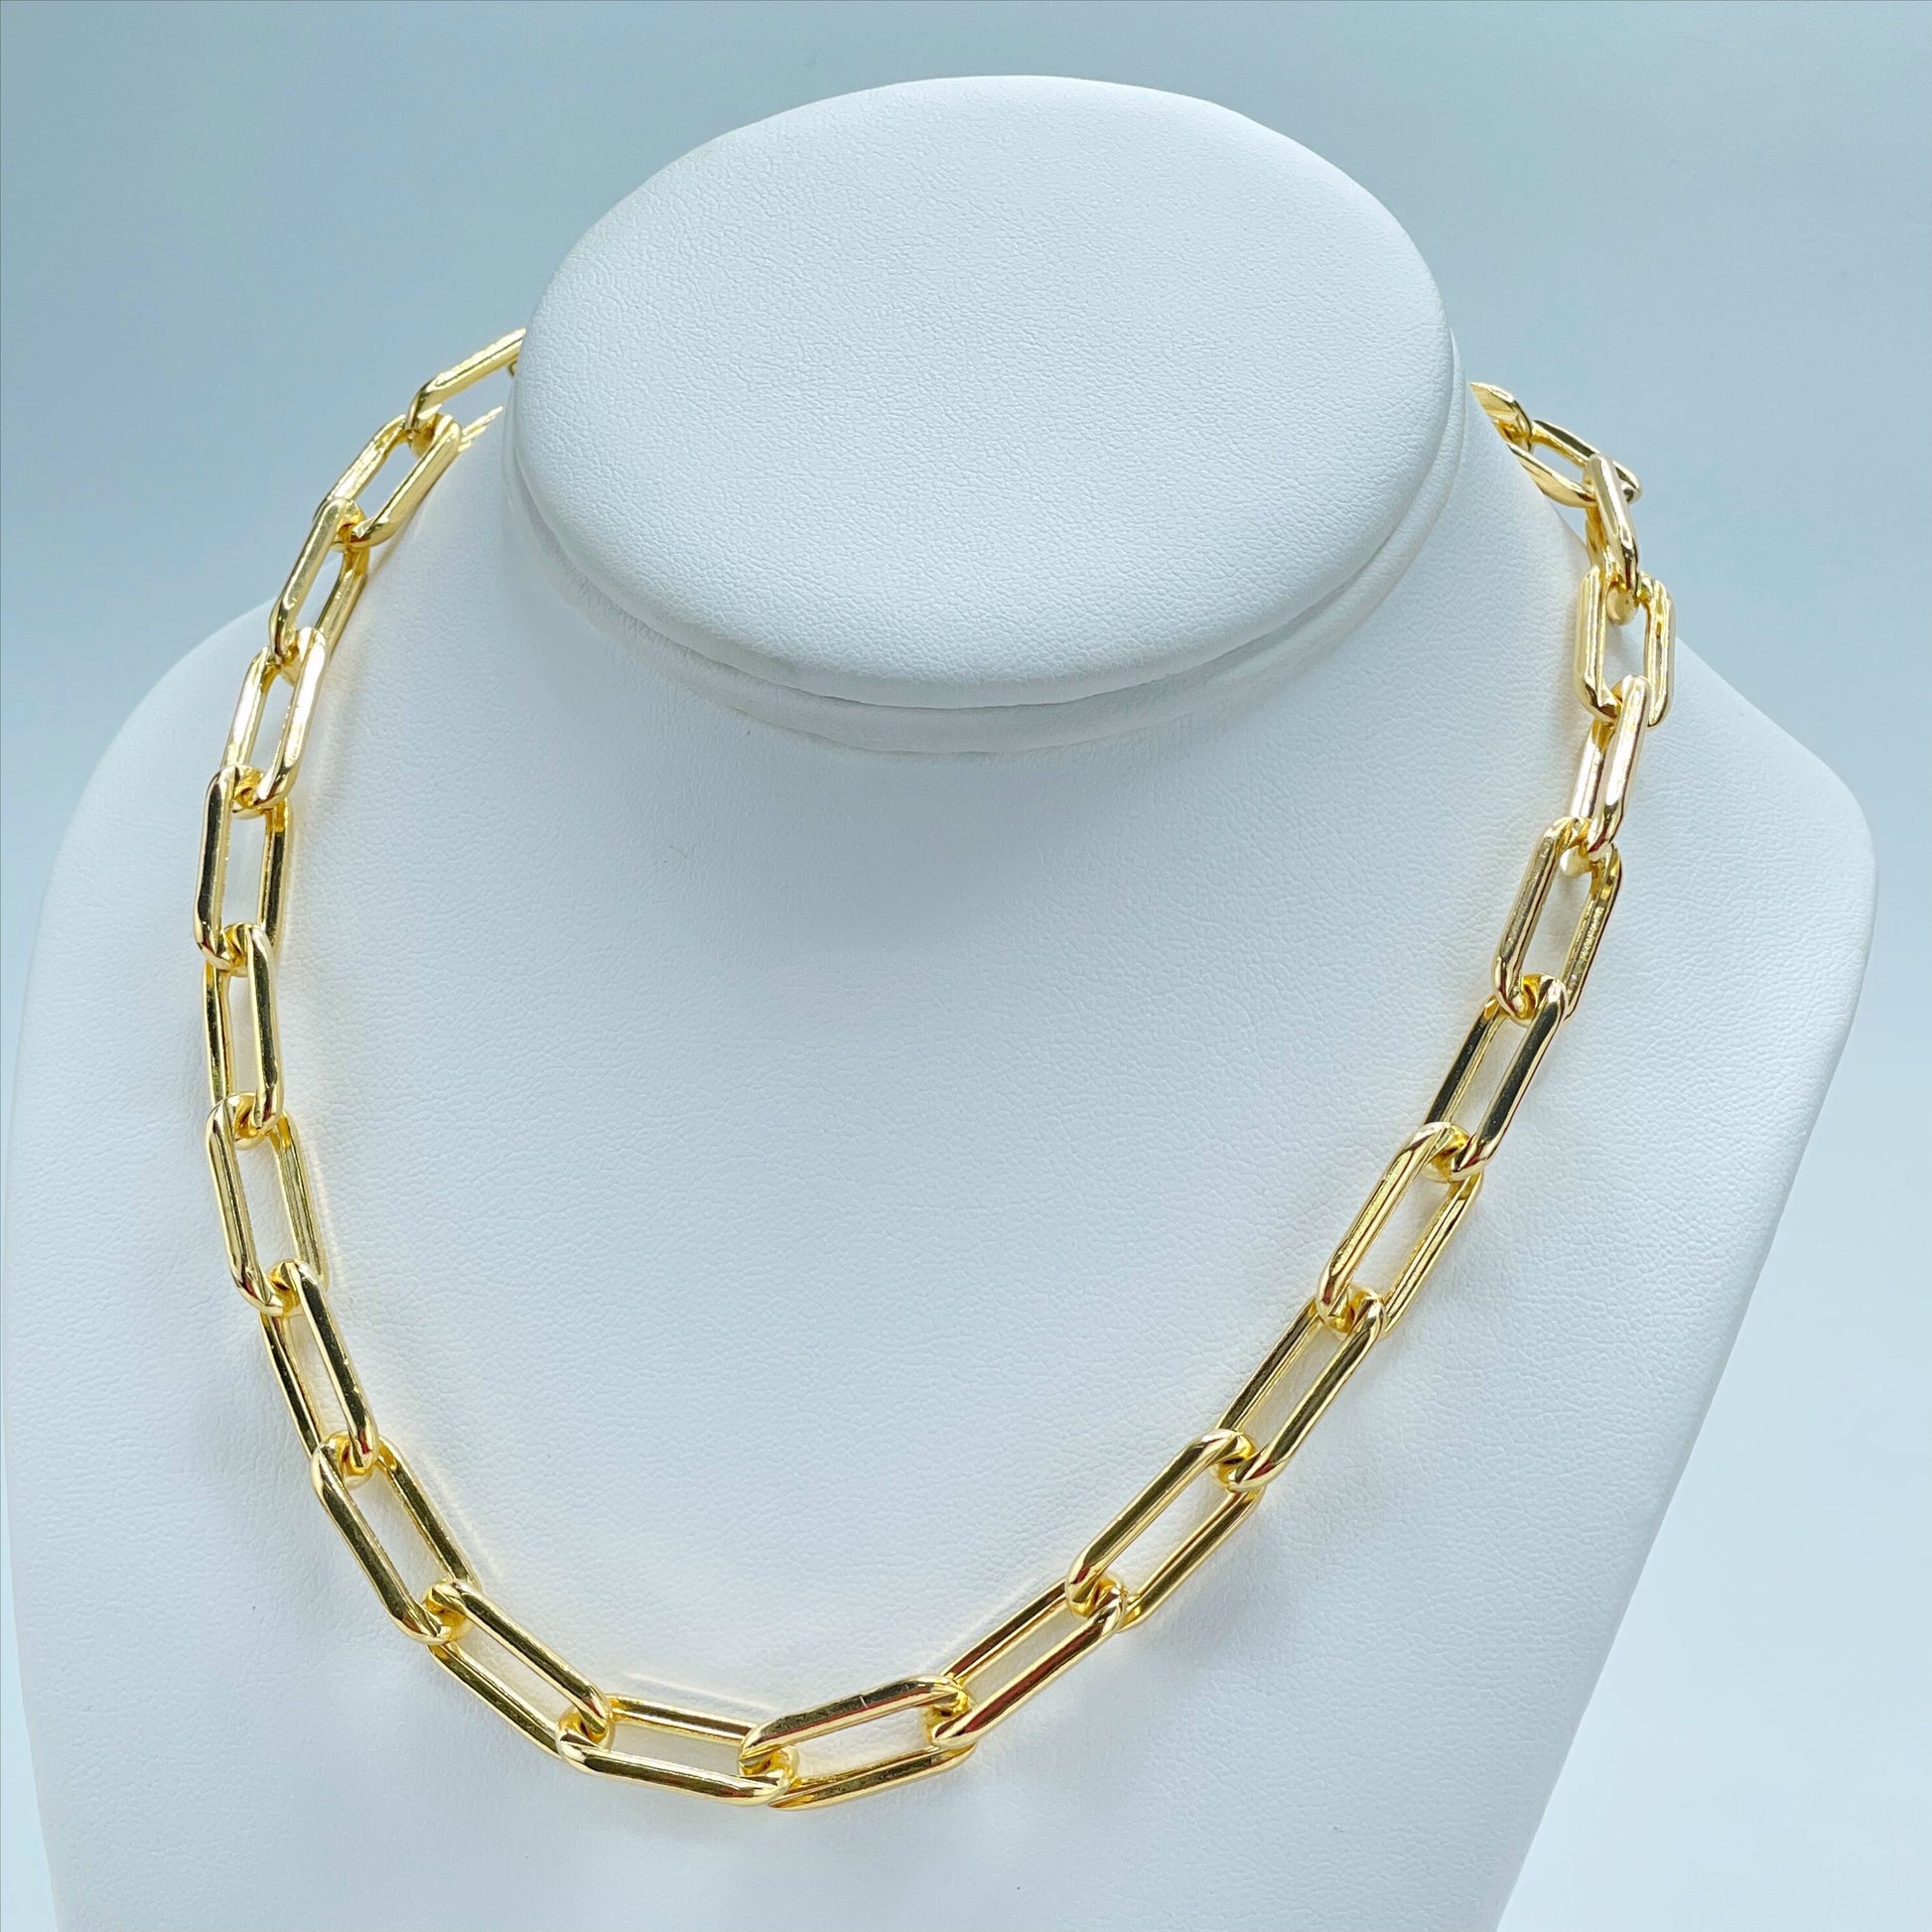 18k Gold Filled 9mm PaperClip Link Chains  Wholesale Jewelry Supplies